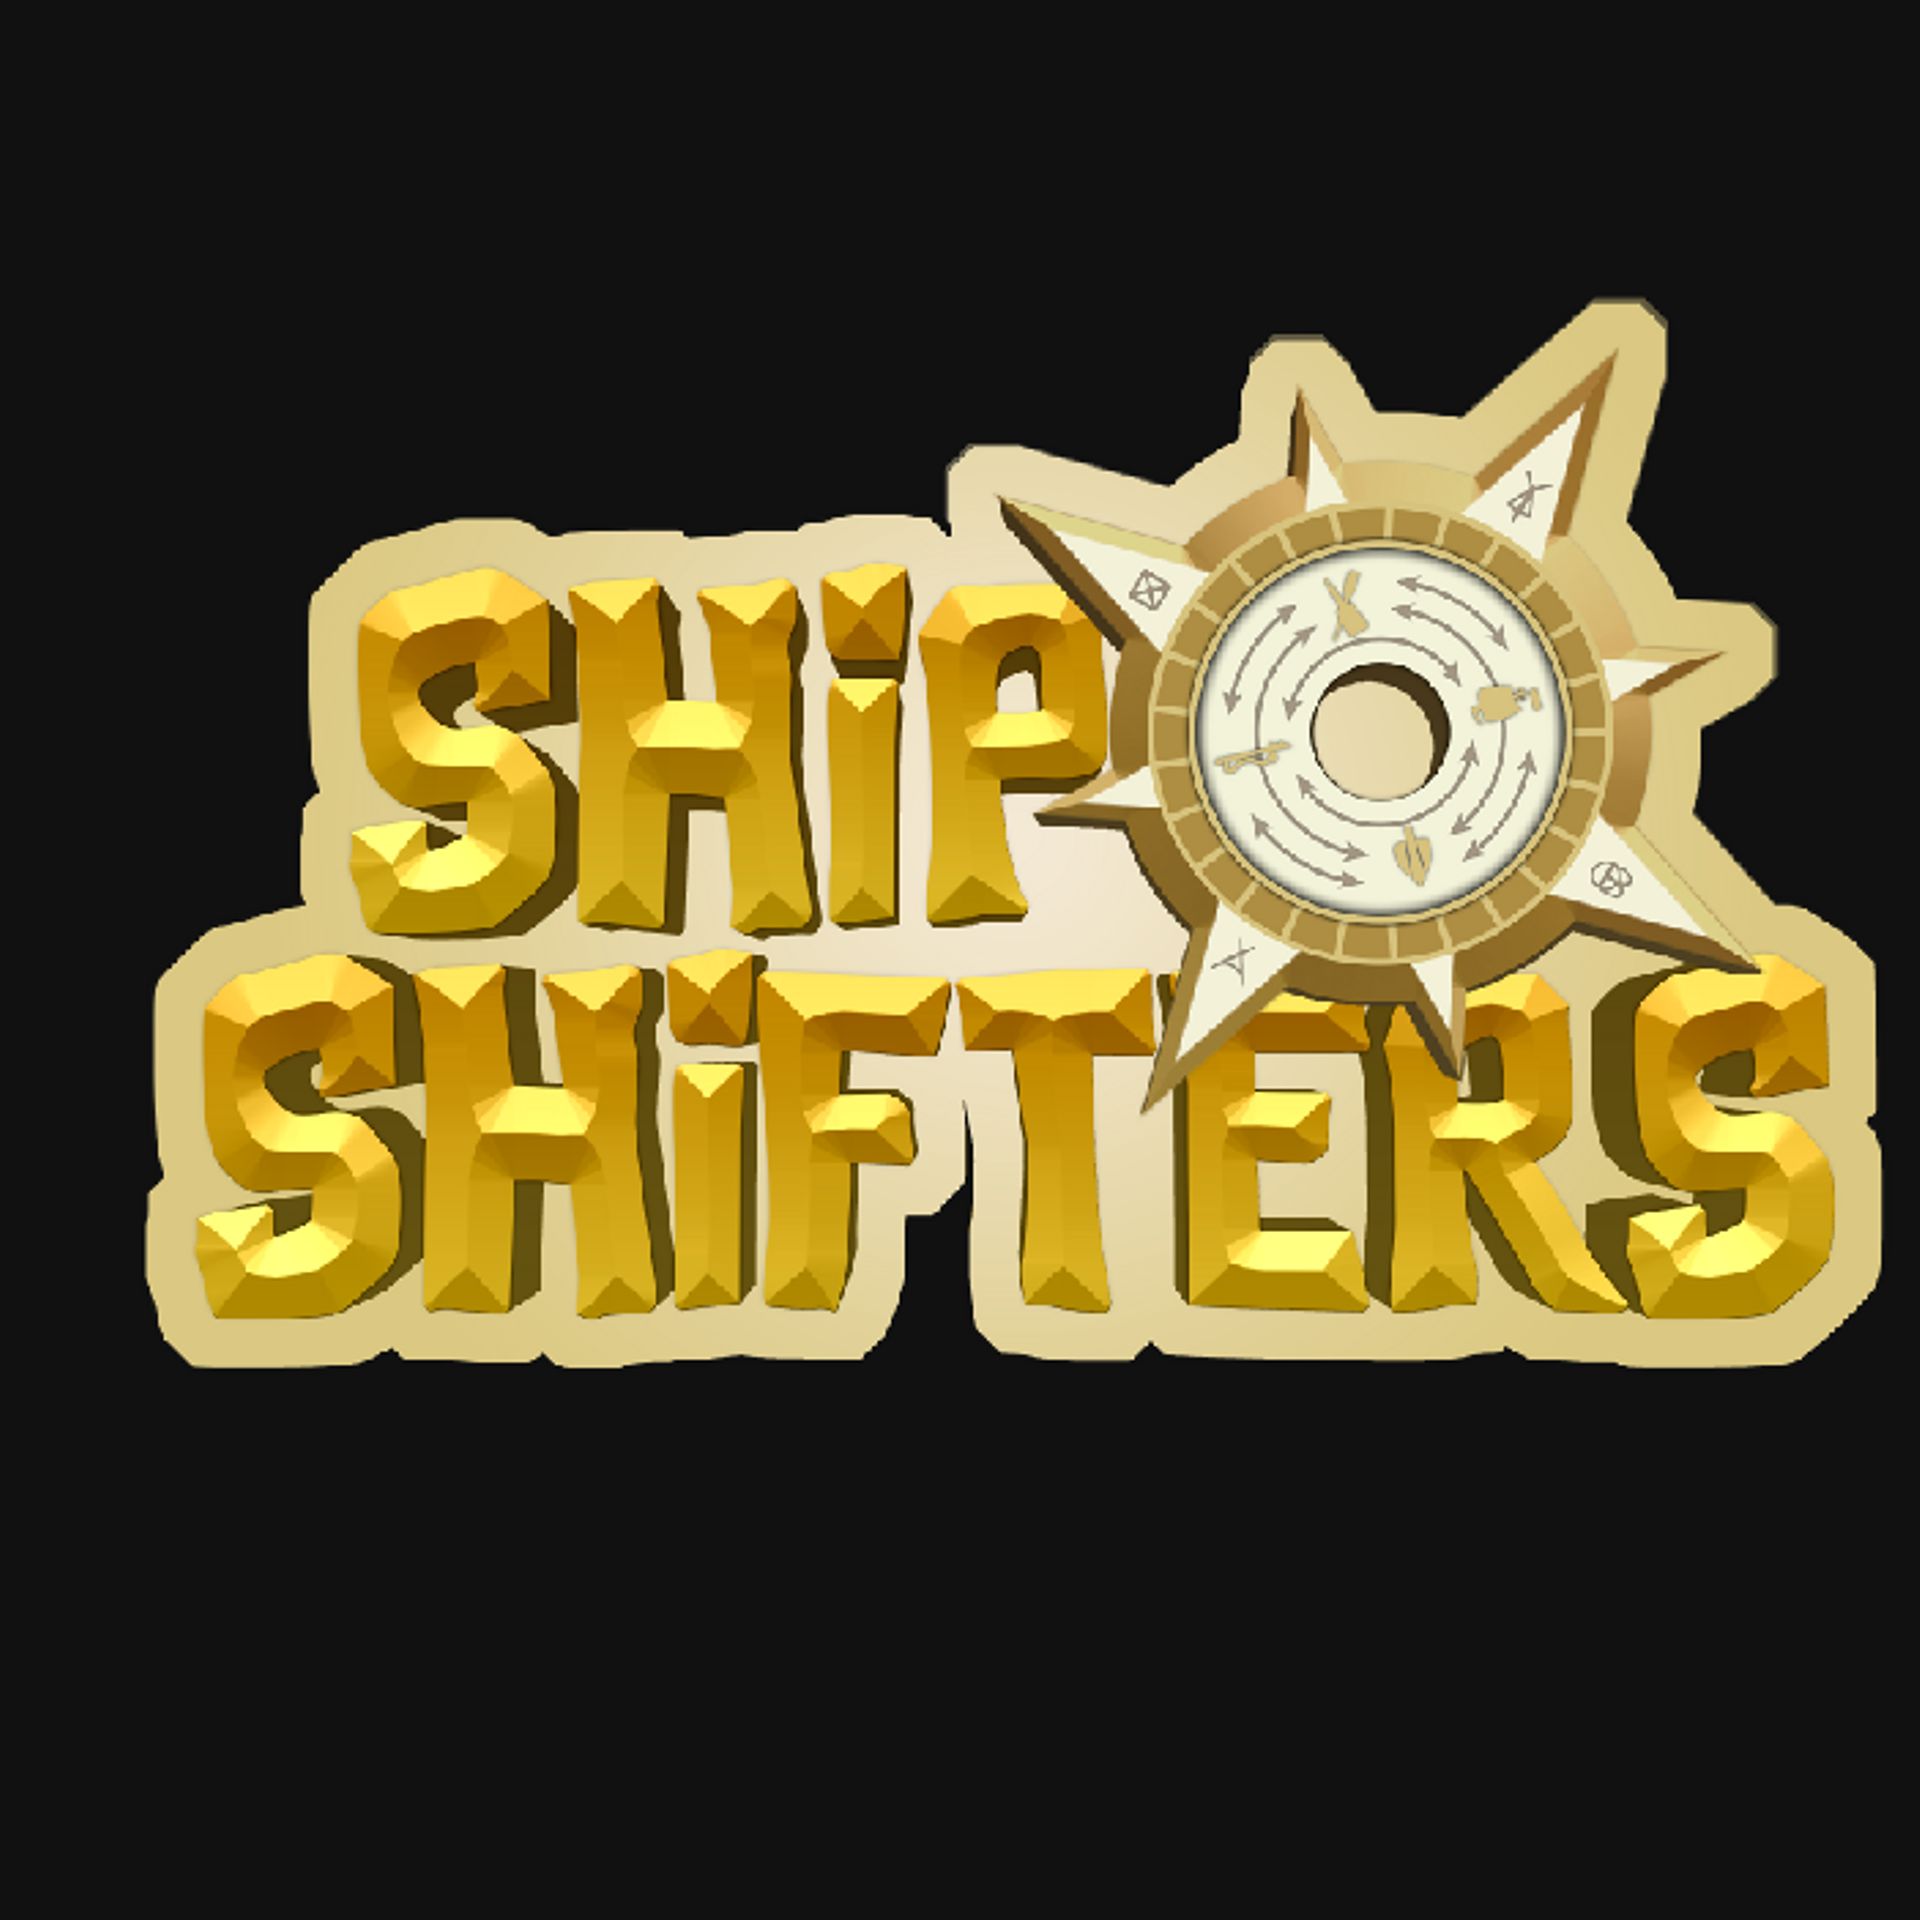 Project ShipShifters